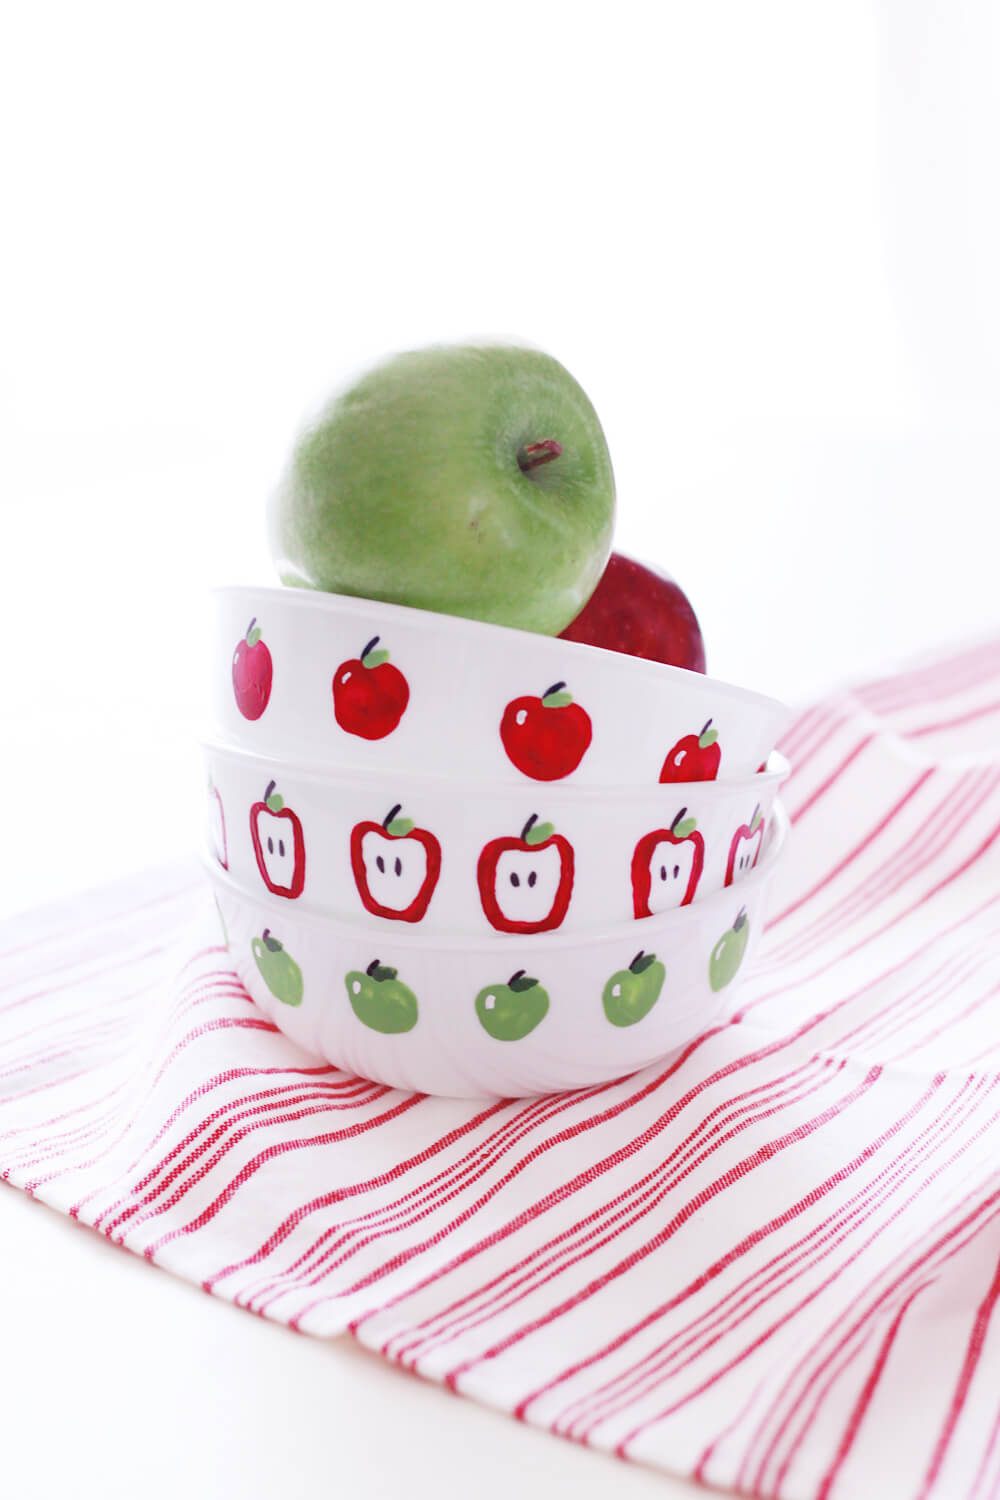 Apple Fingerpaint Bowls... a fun, family friendly DIY to welcome autumn and the new school year!